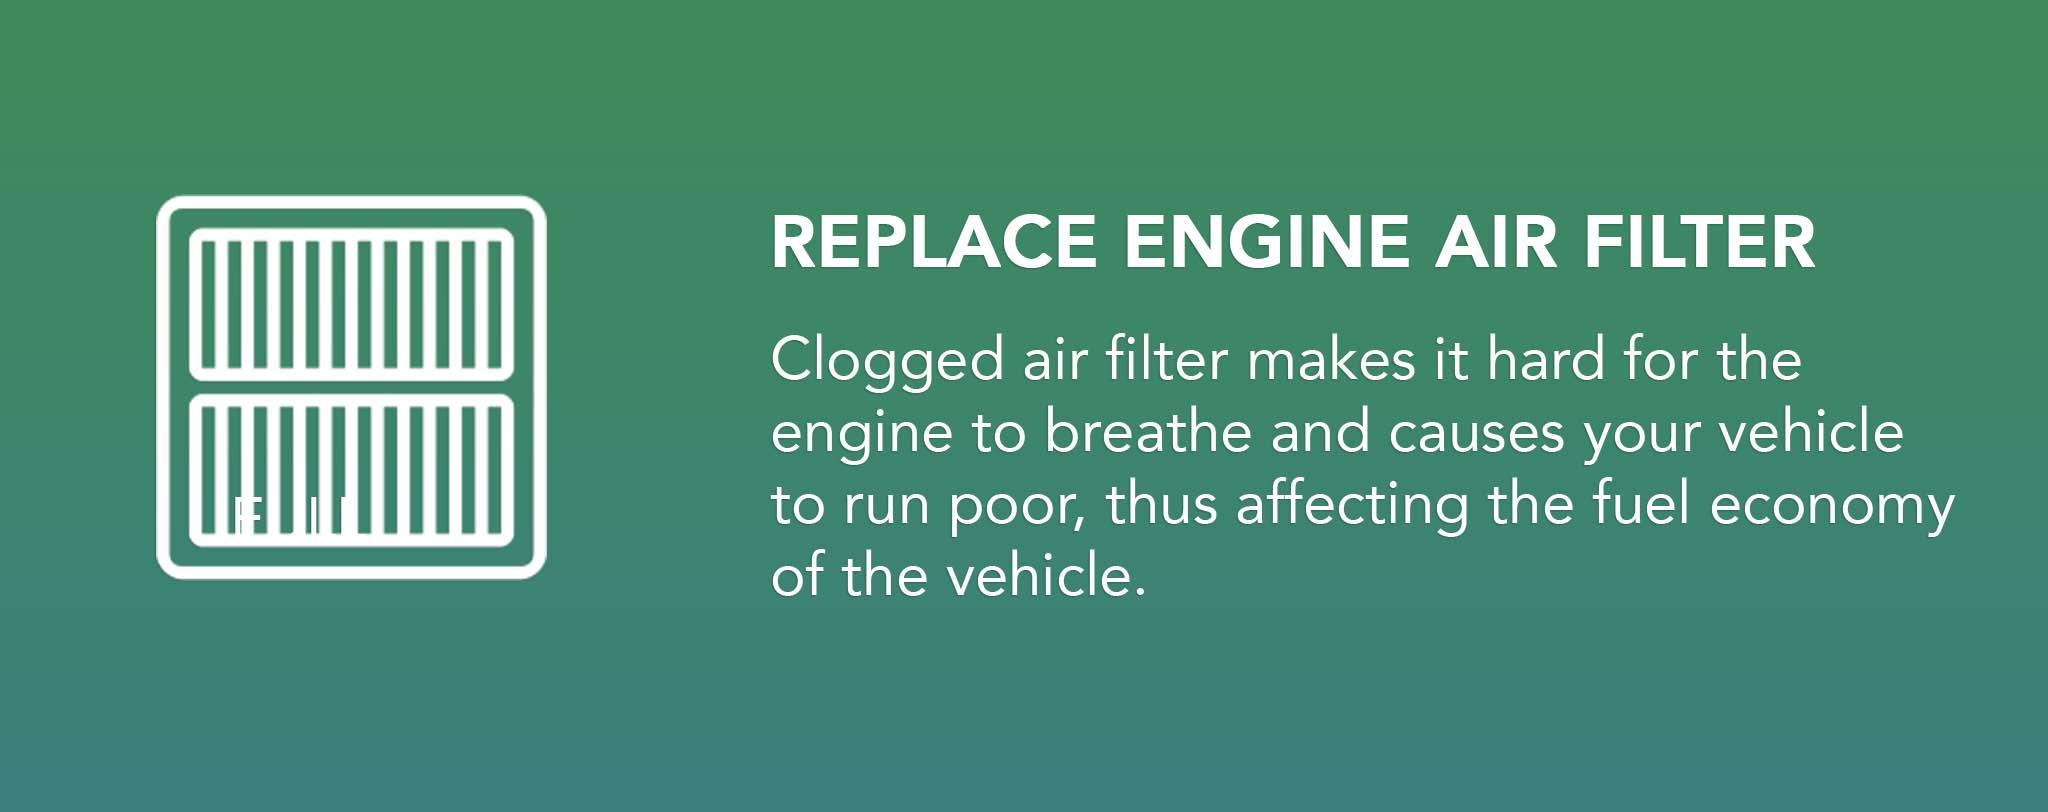 Clogged air filter makes it hard for the  engine to breathe and causes your vehicle to run poor, thus affecting the fuel economy of the vehicle.